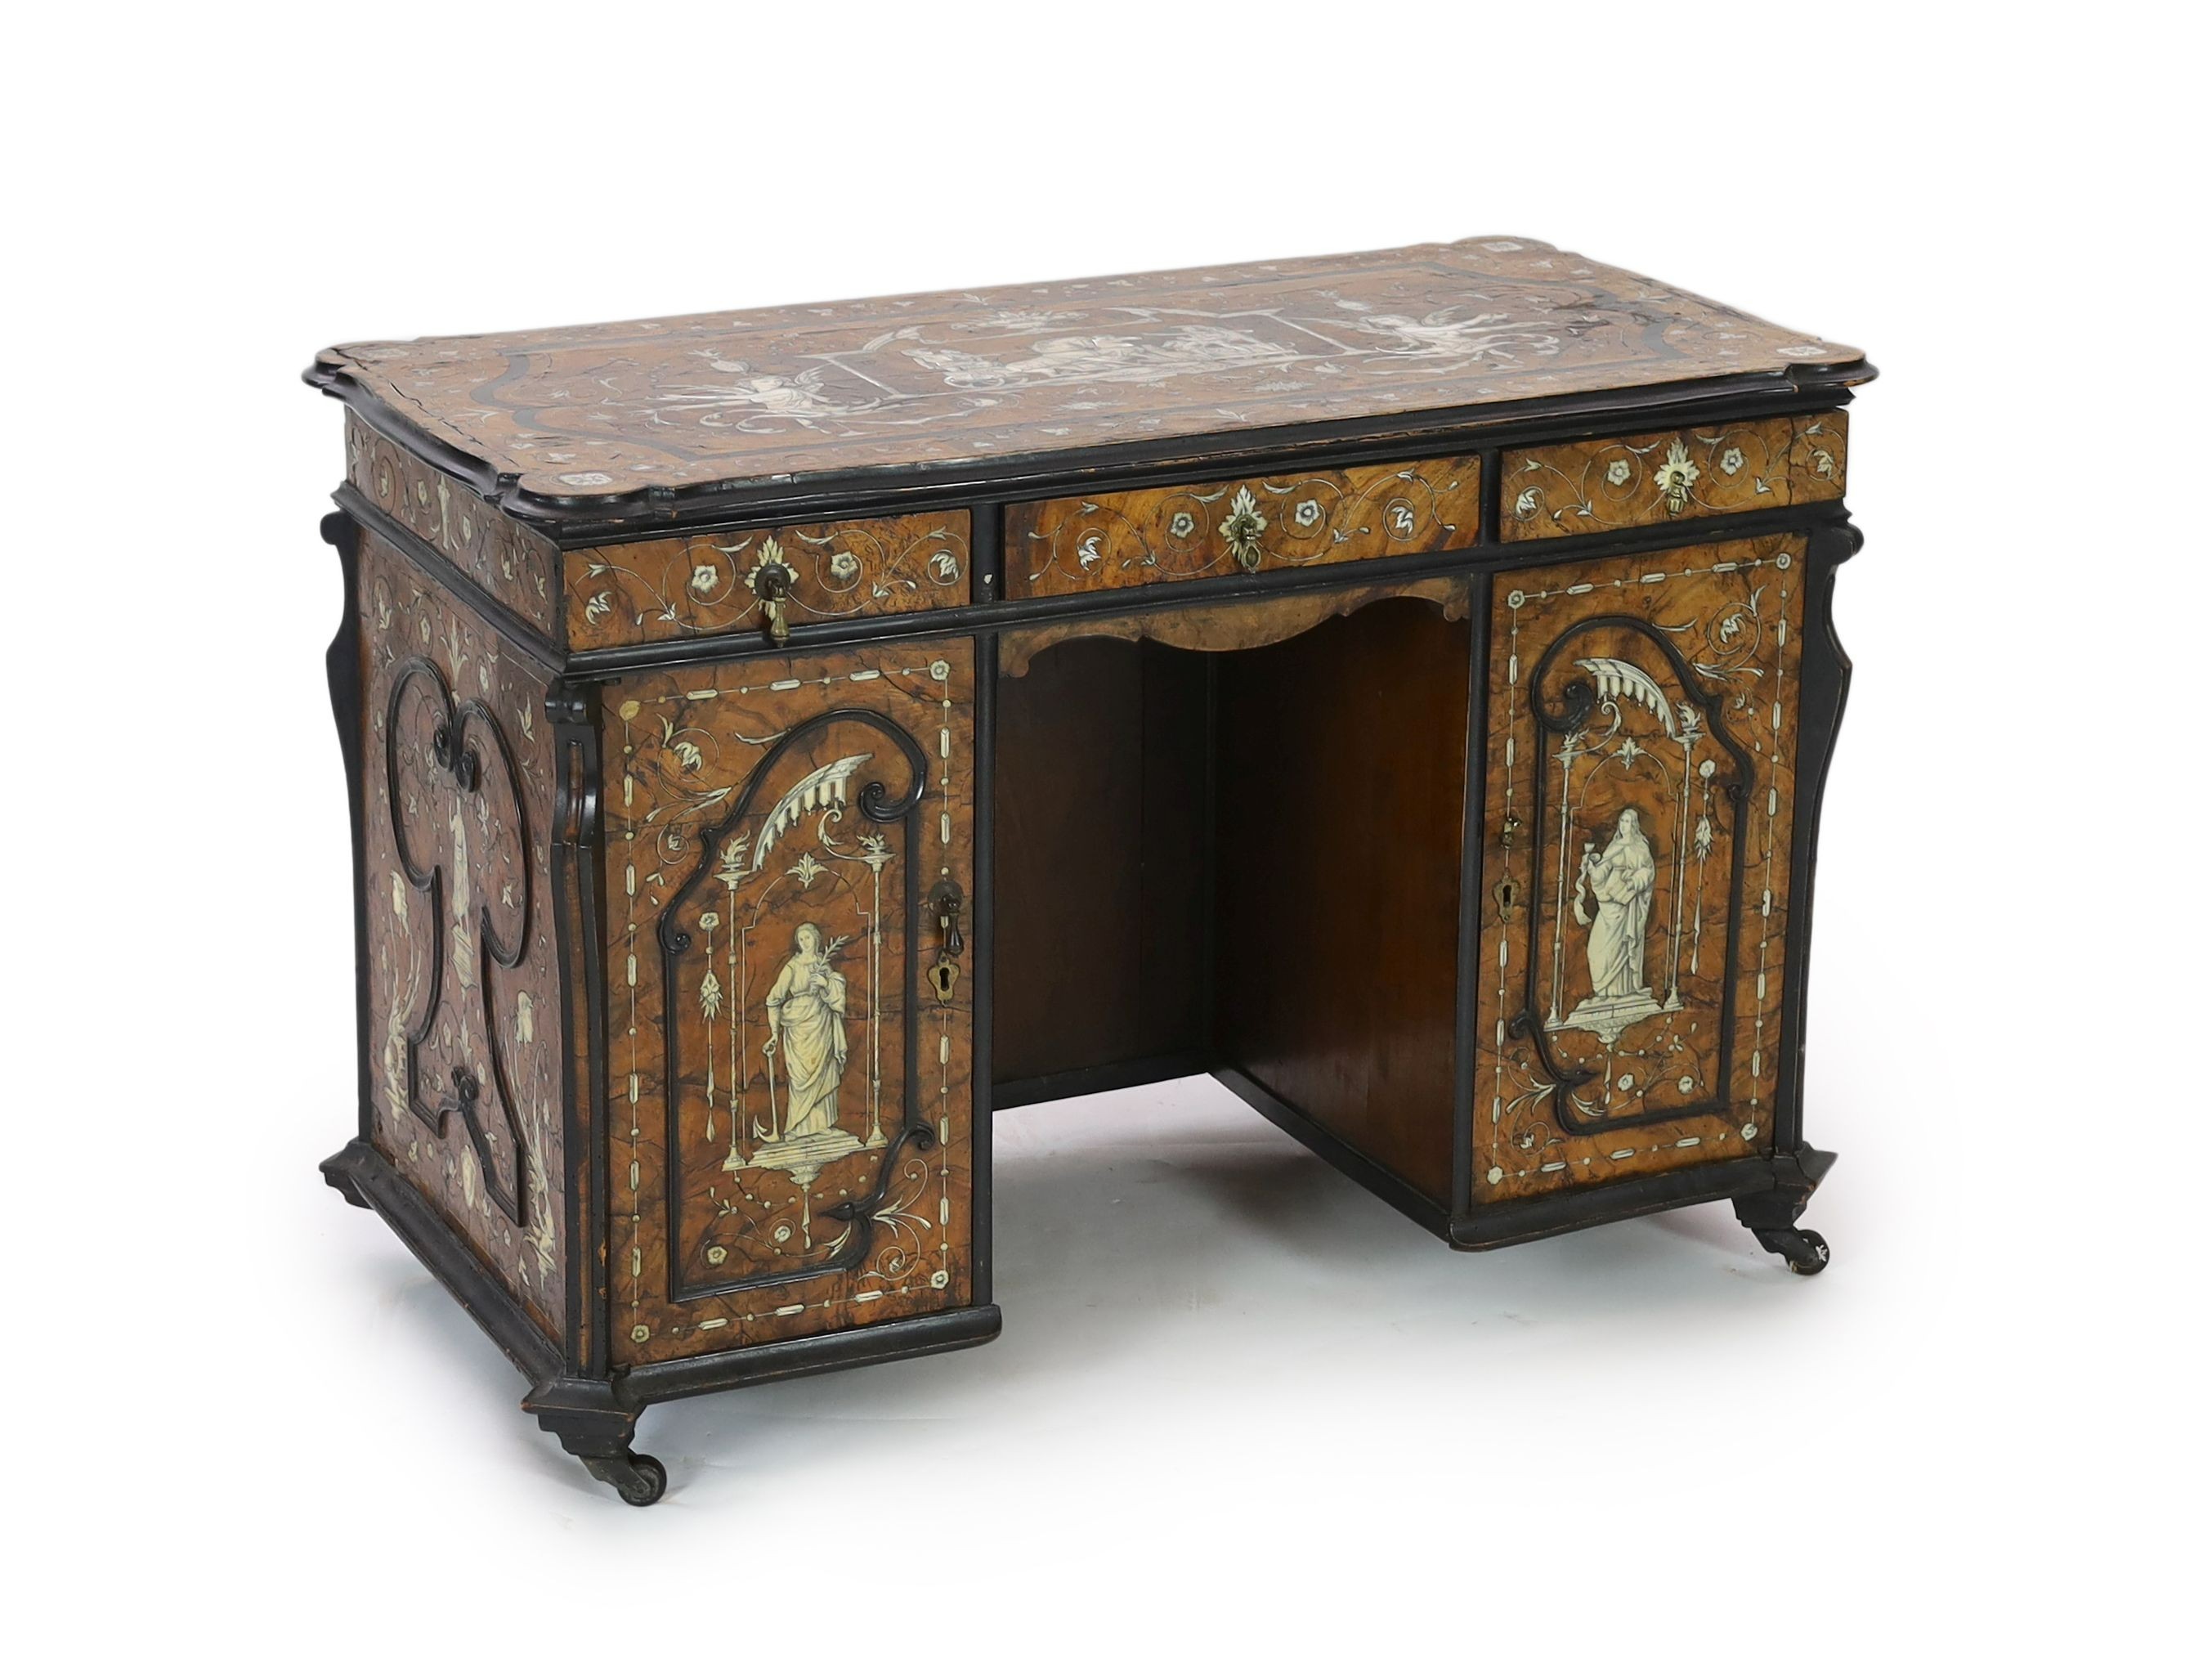 NOT TO BE CLEARED - SEE DG/AM An important 18th century Lombardy ebony banded walnut and ivory inlaid twin pedestal desk, the top and sides inlaid with a scenes from Homer’s Iliad, after original drawings by John Flaxman